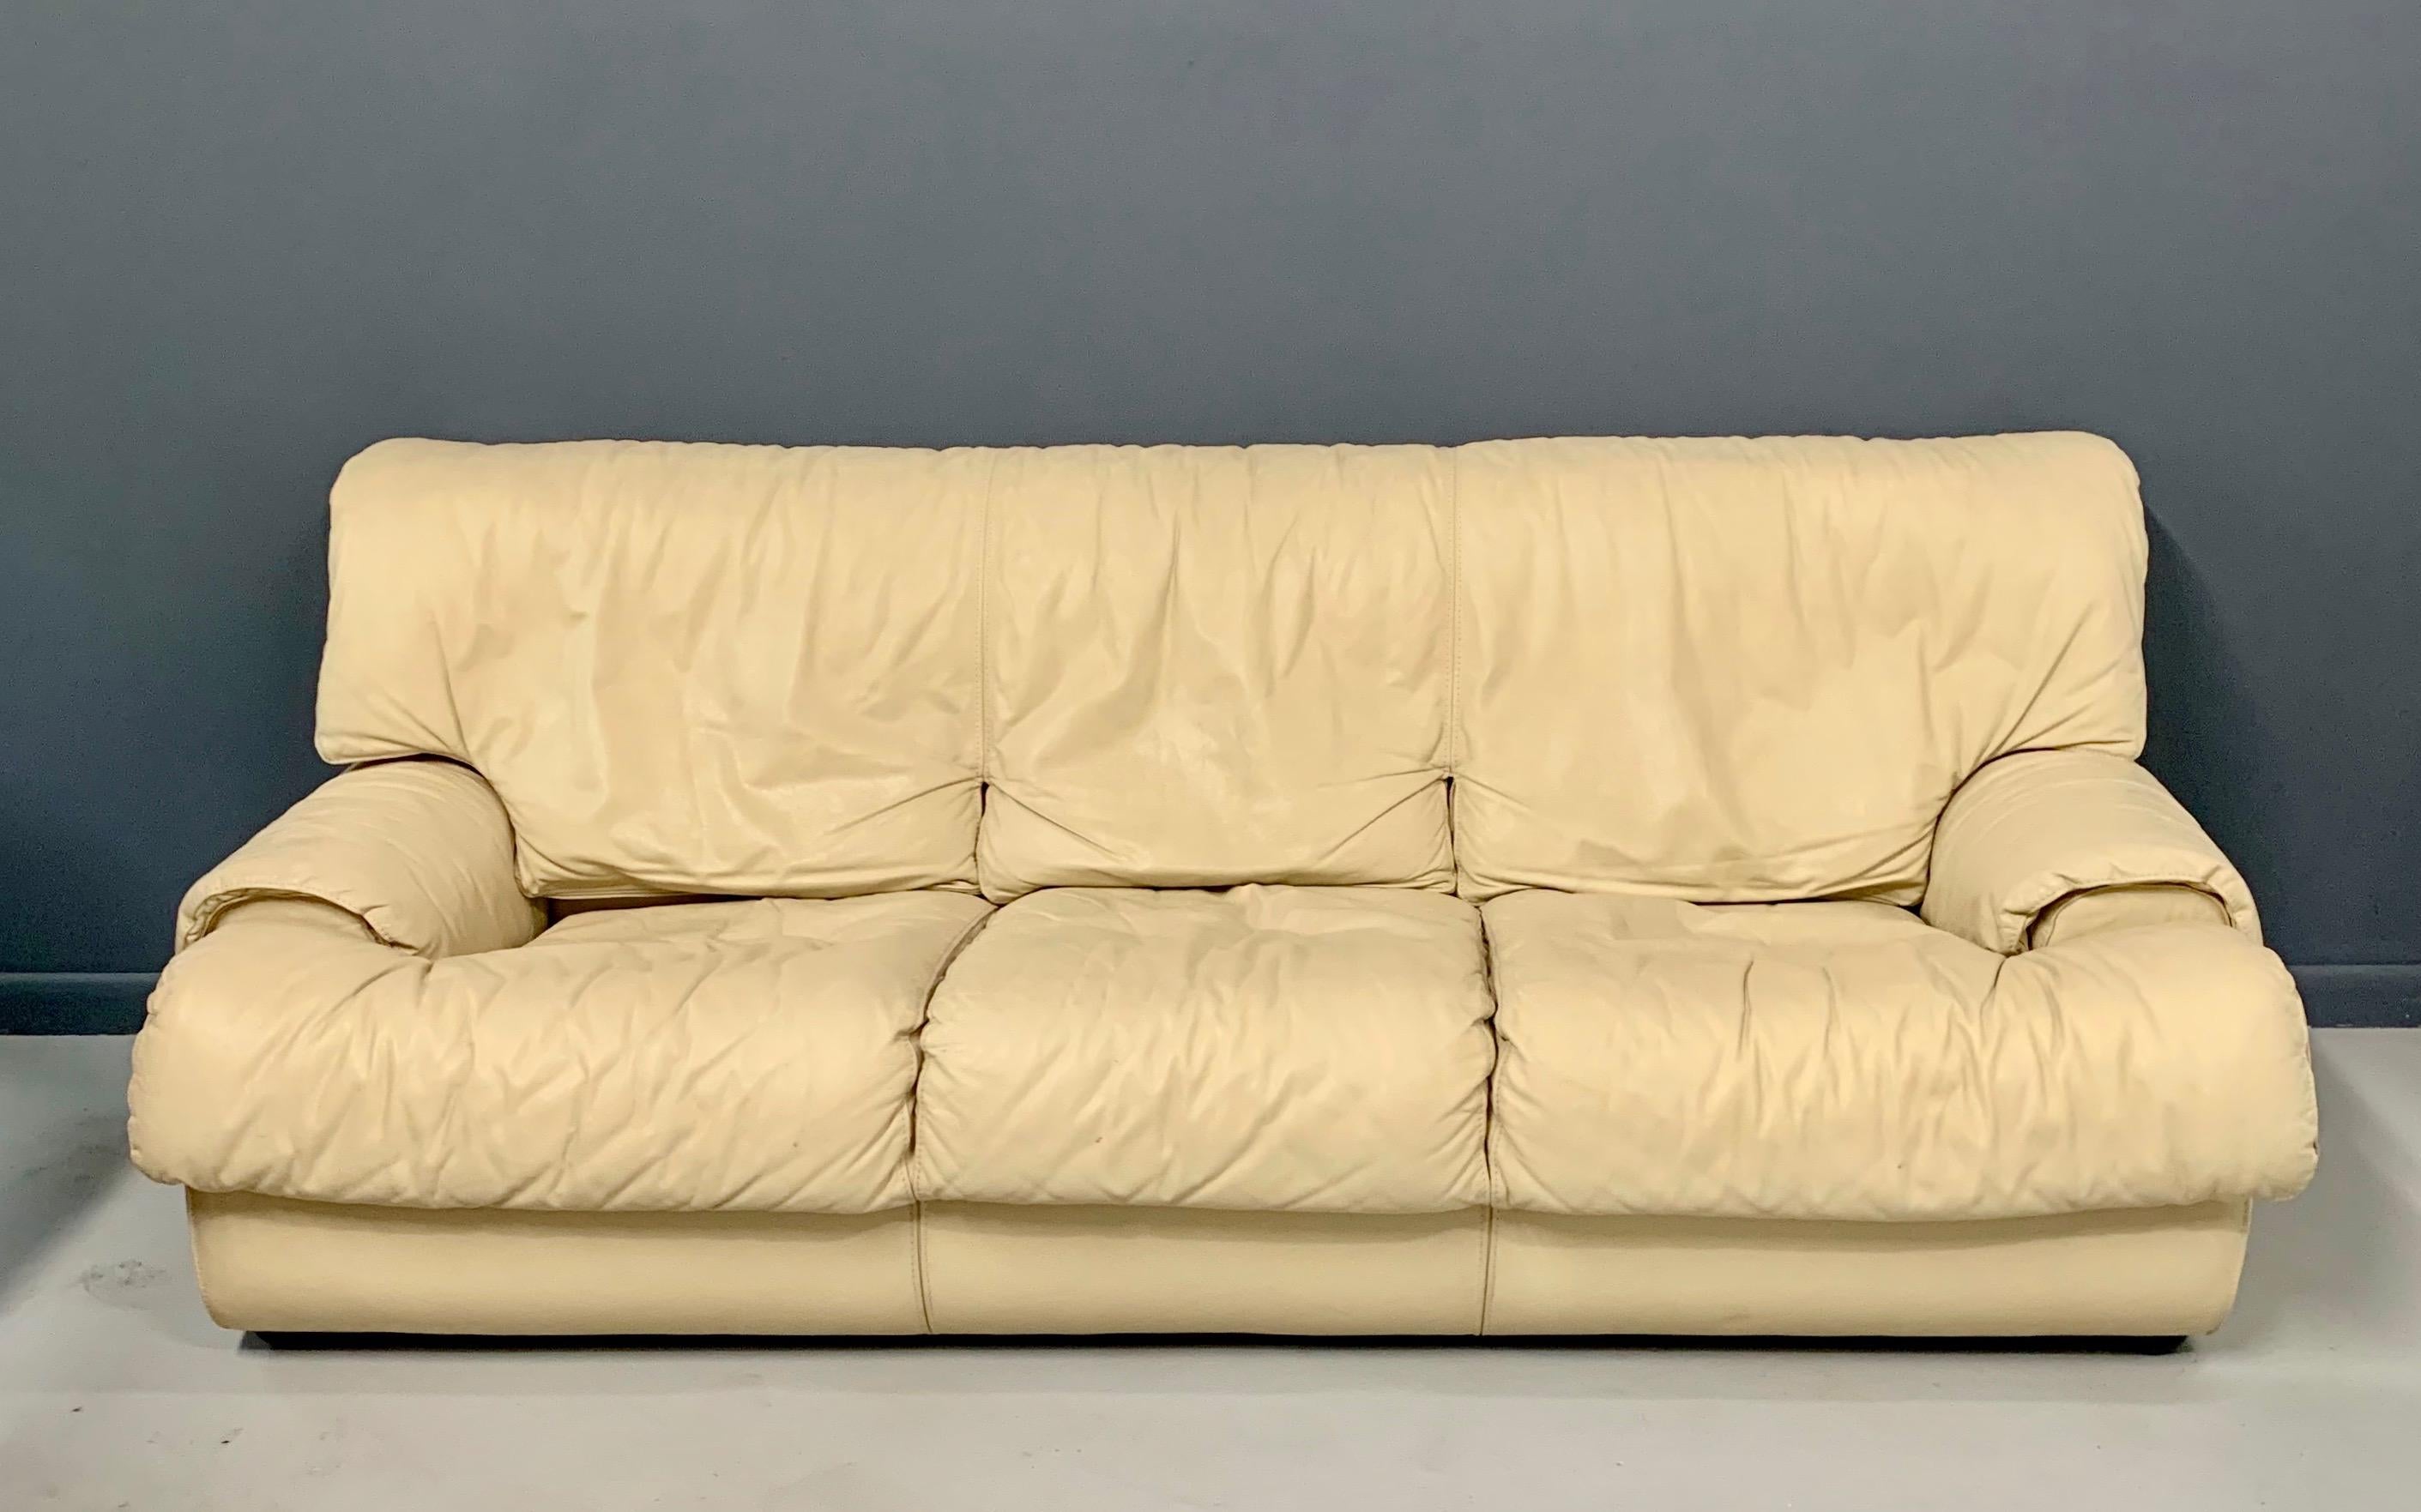 Wonderfully comfortable sofa, surrounds you in a softly draped fawn colored leather.